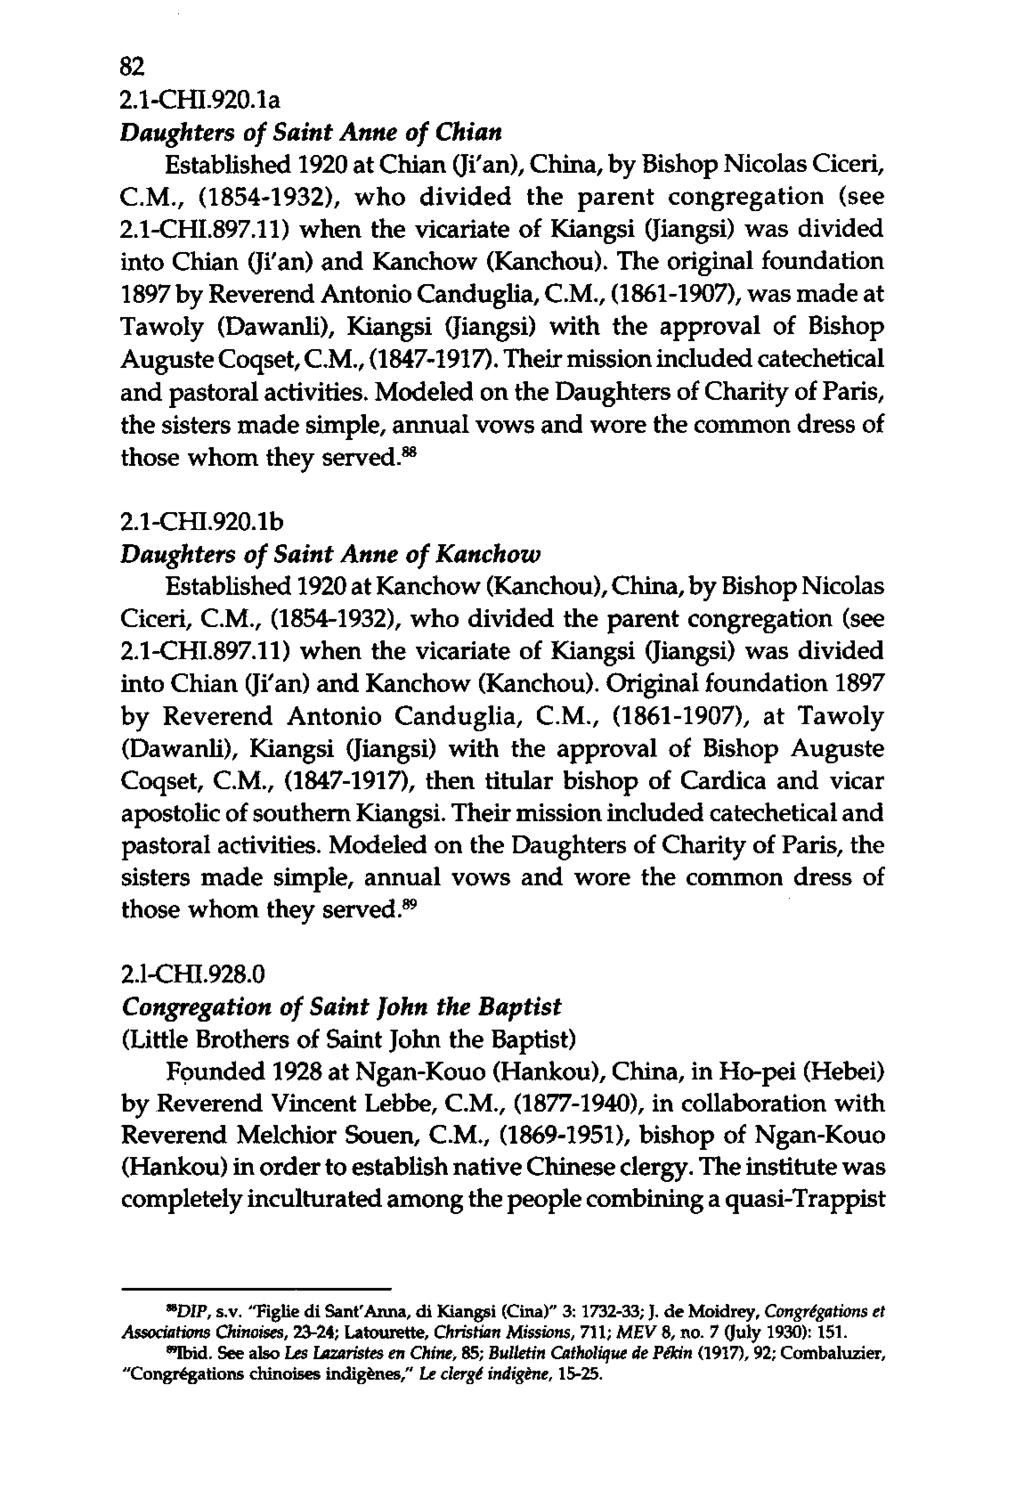 82 2.1-CHI.920.1a Daughters of Saint Anne of Chian Established 1920 at Chian (Wan), China, by Bishop Nicolas Ciceri, CM., (1854-1932), who divided the parent congregation (see 2.1-CHI.897.